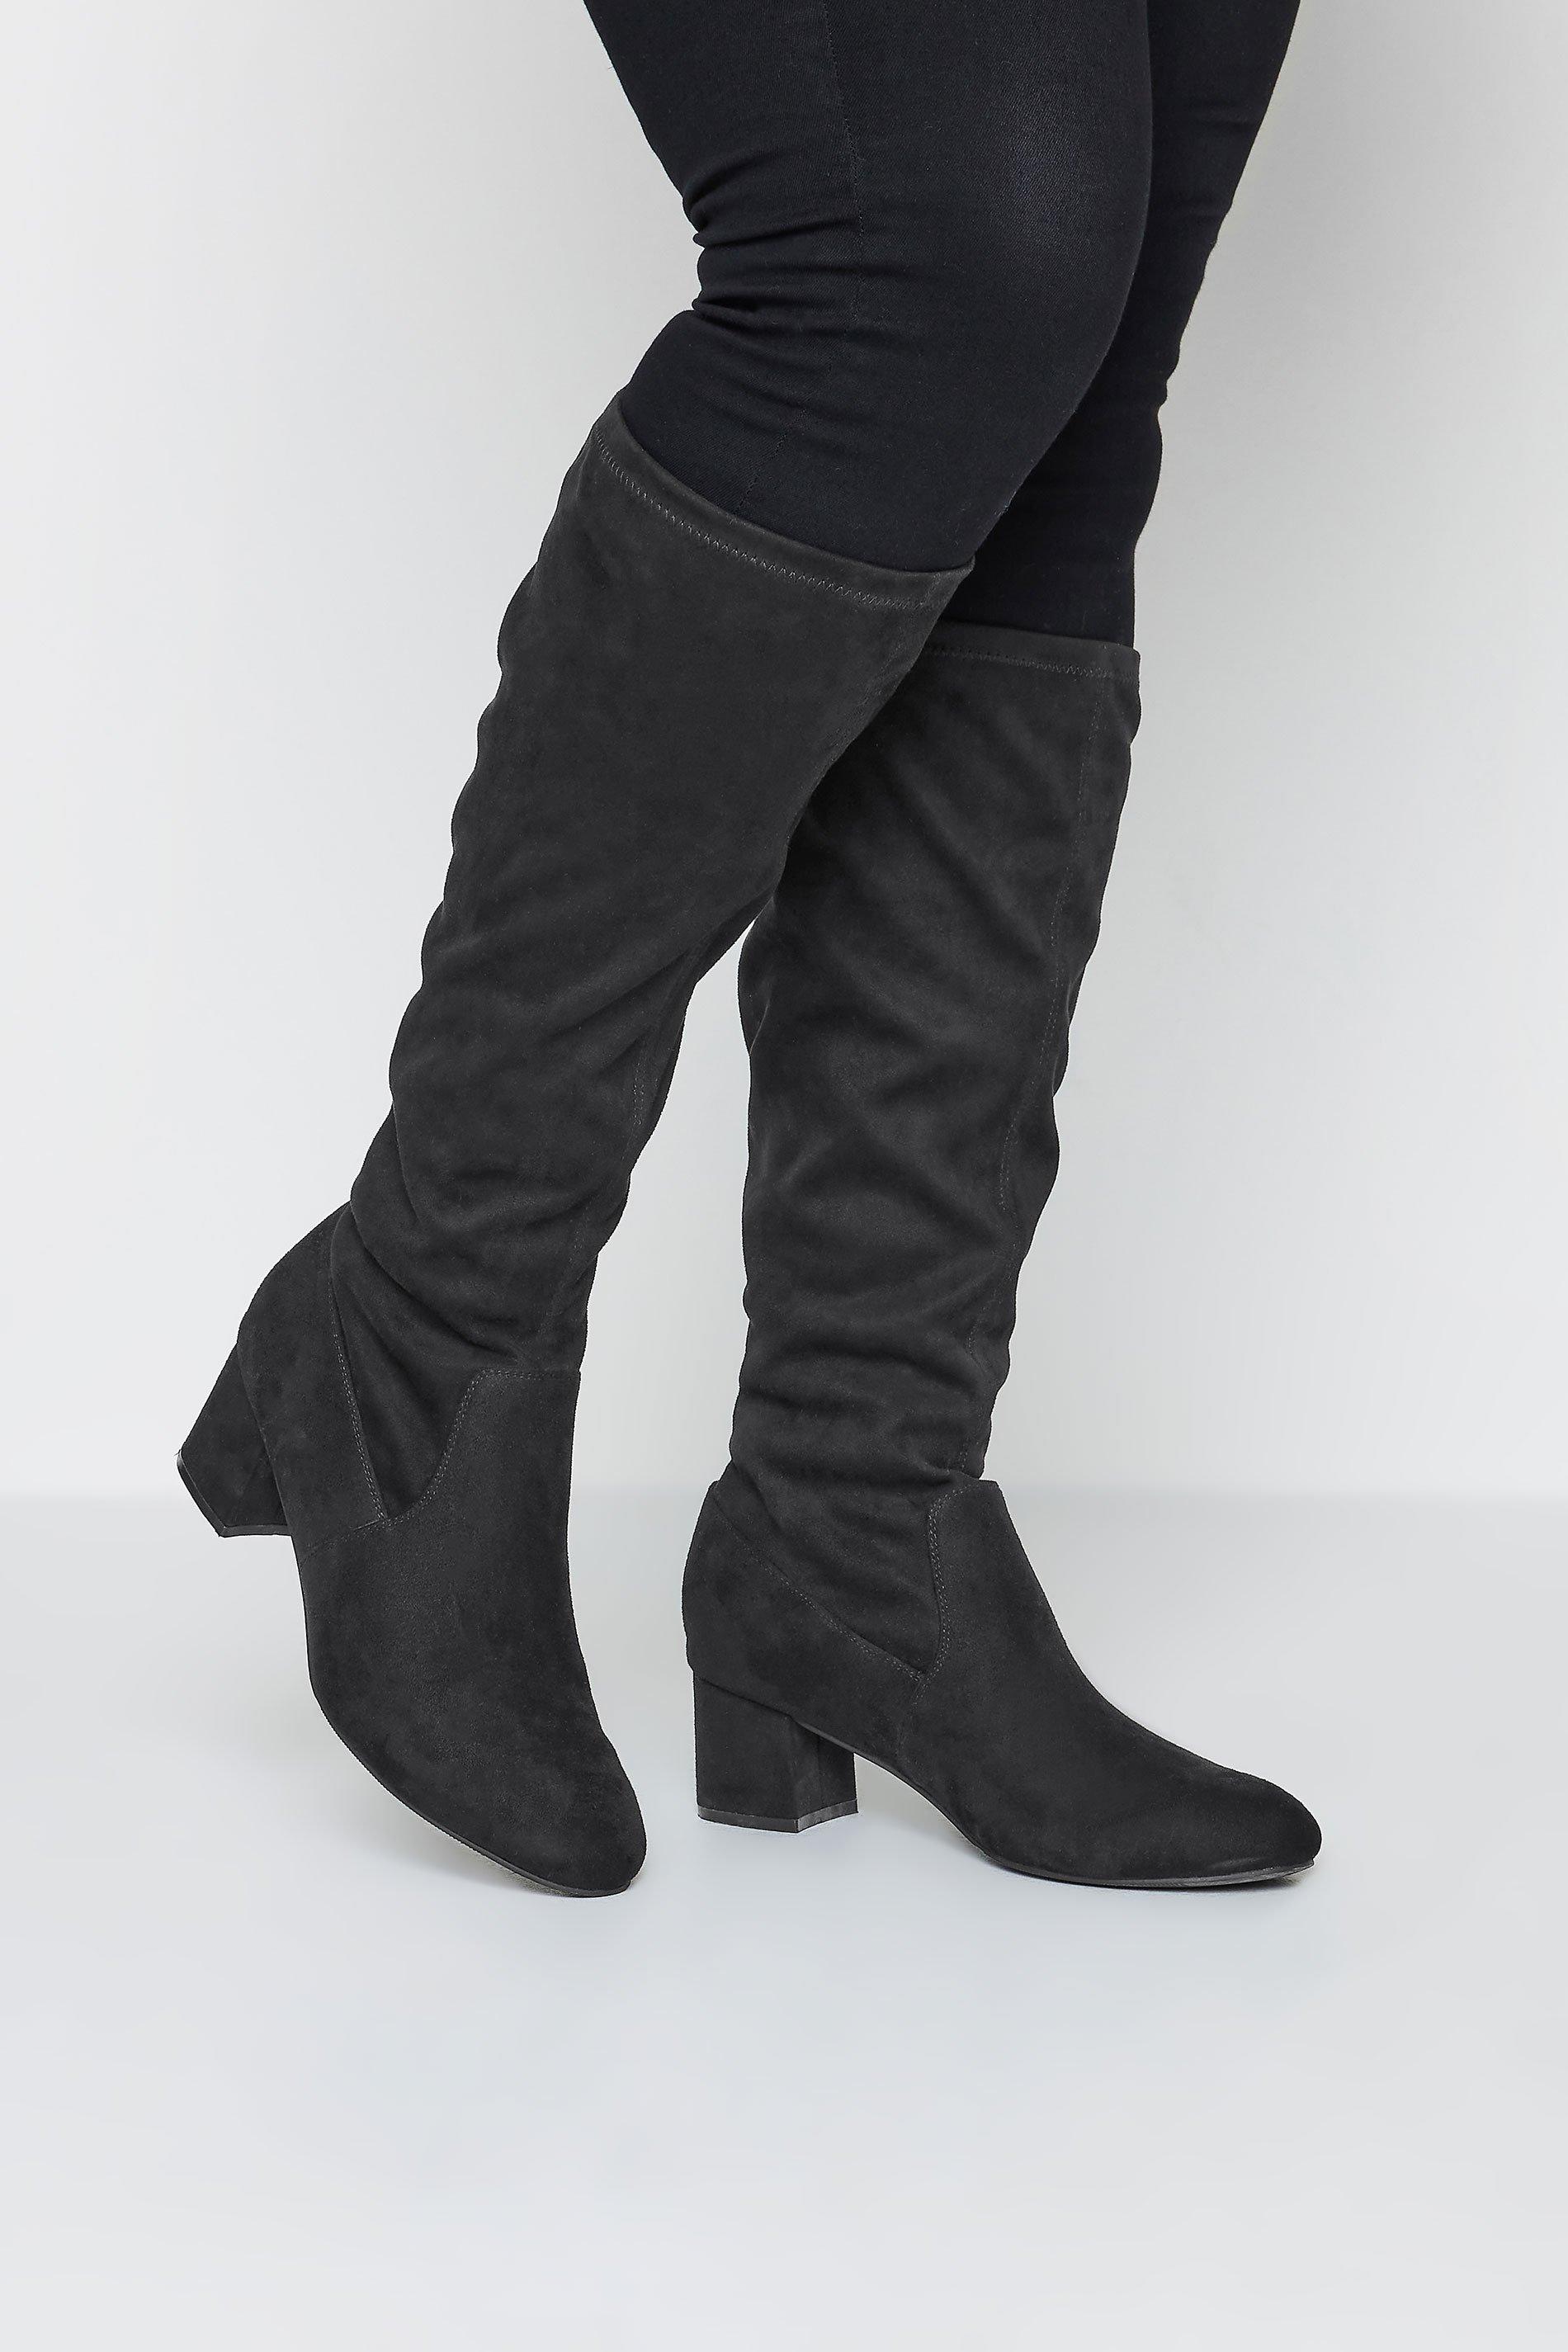 Wide & Extra Wide Fit Faux Suede Stretch Back Knee High Boots